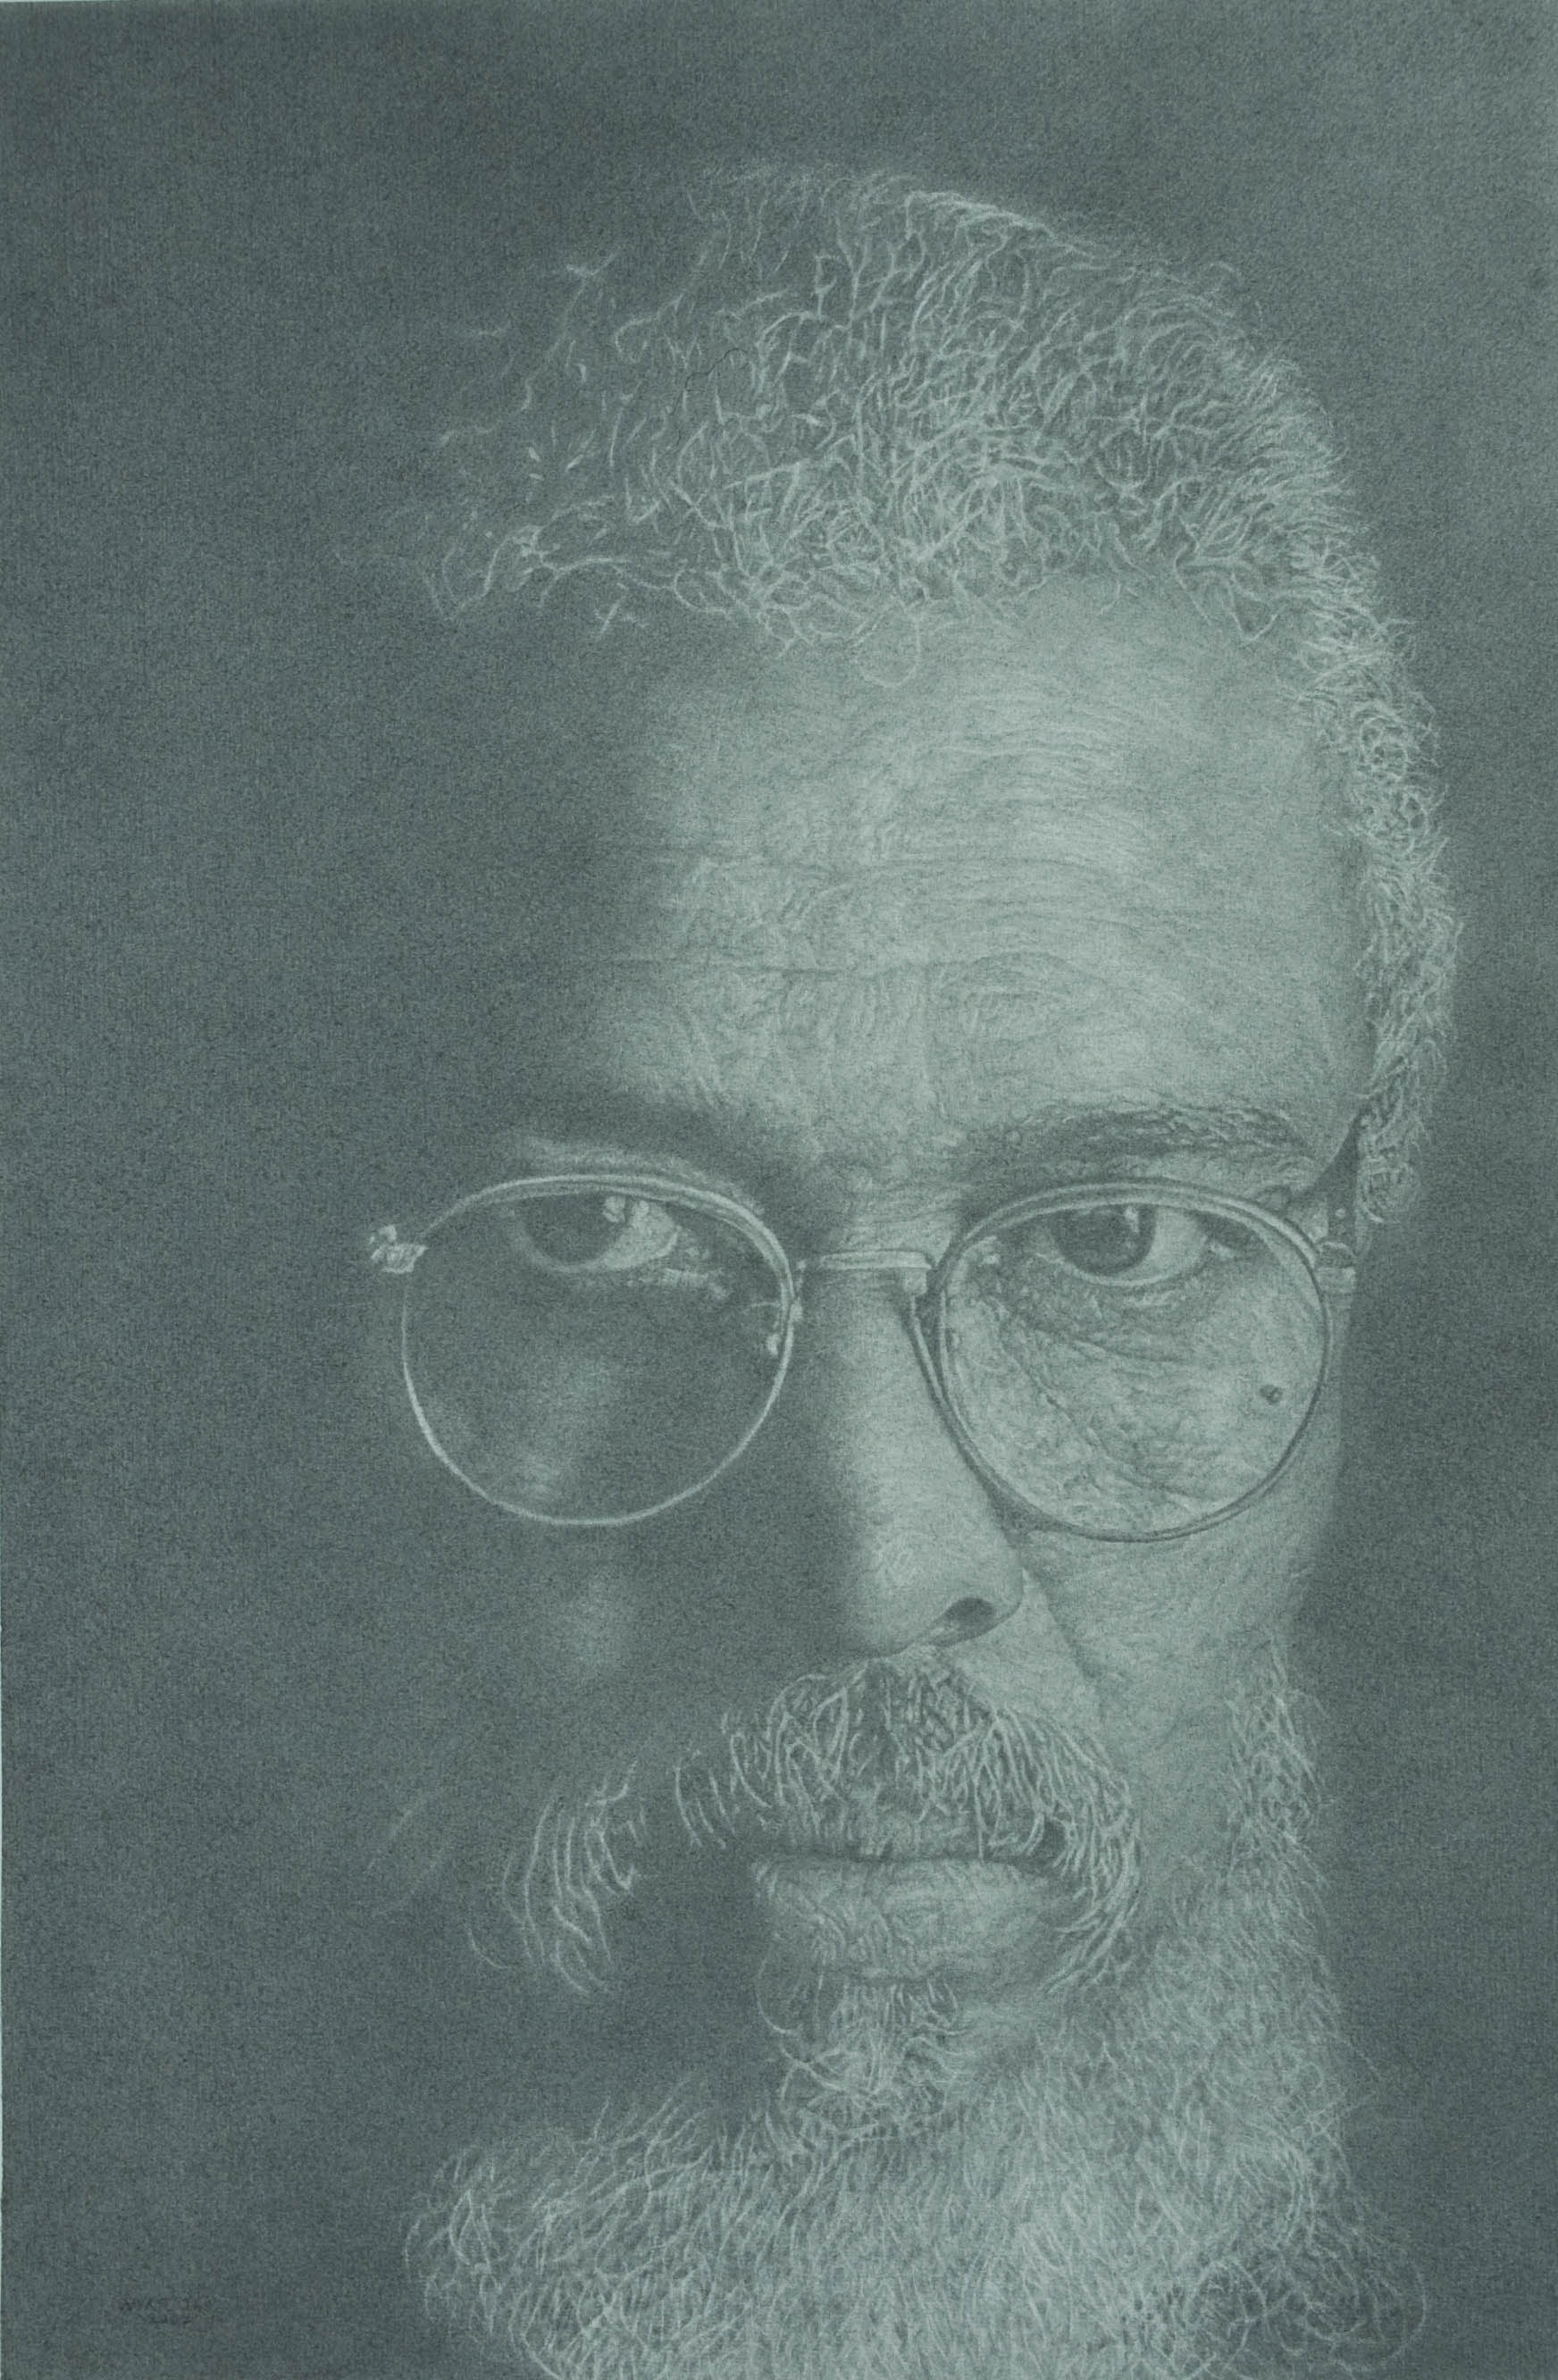   "This One Is For John"    2007 Pencil on wove paper   22 x 14 ½ inches   © Richard Wyatt Jr.  